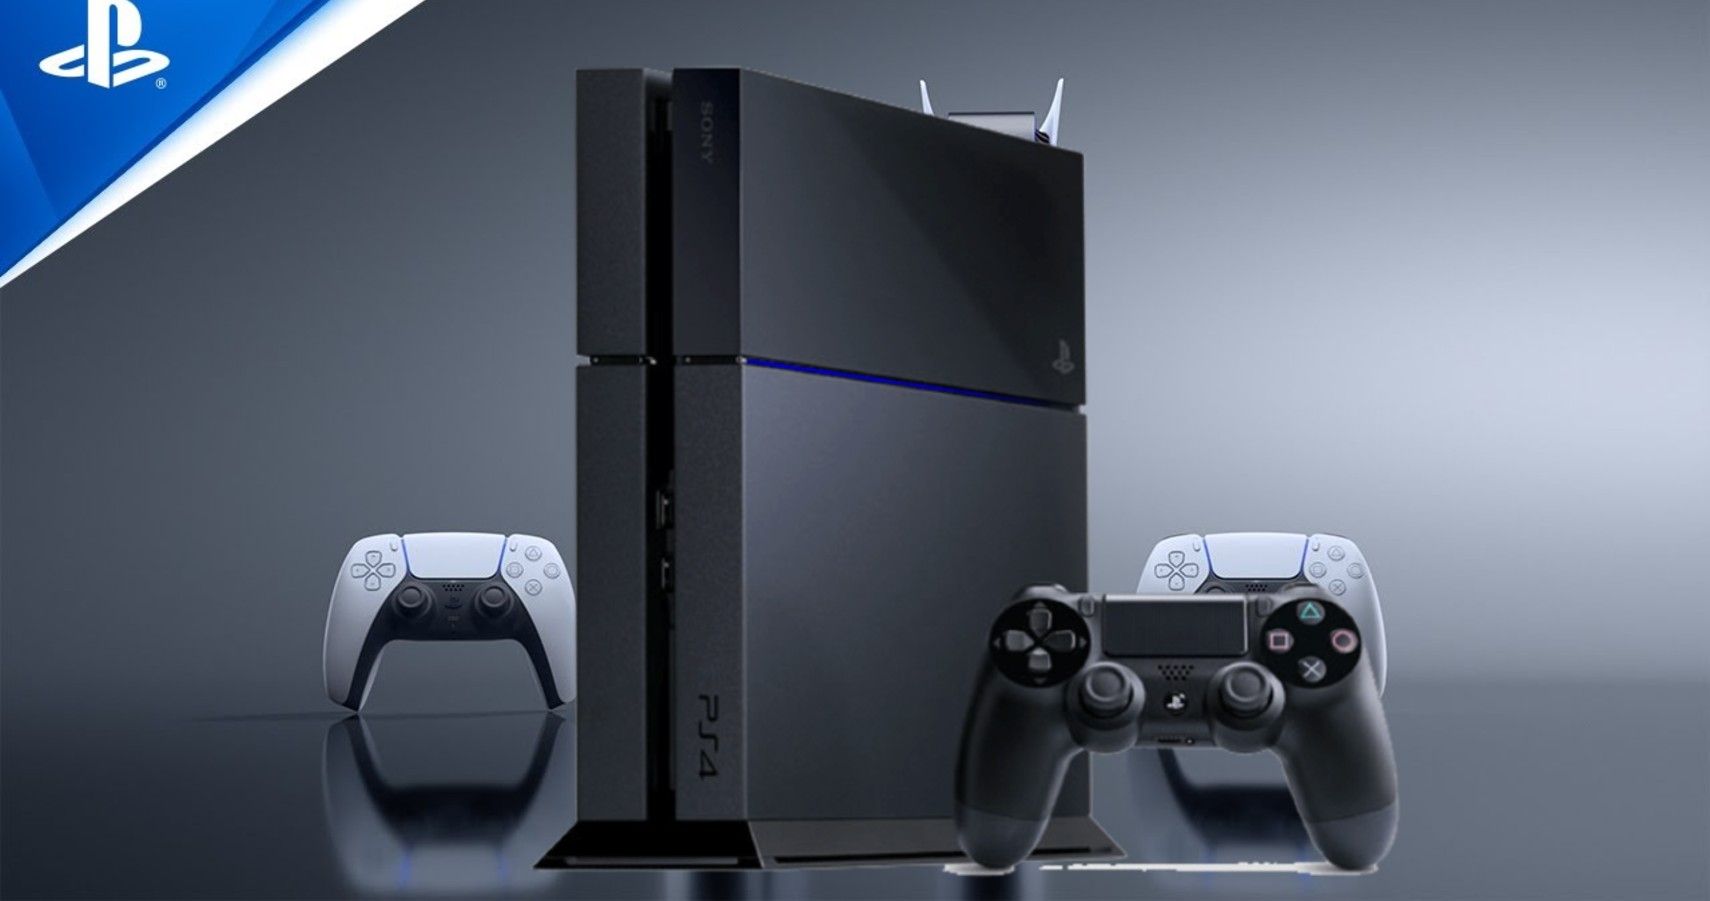 ps4 in front of a ps5